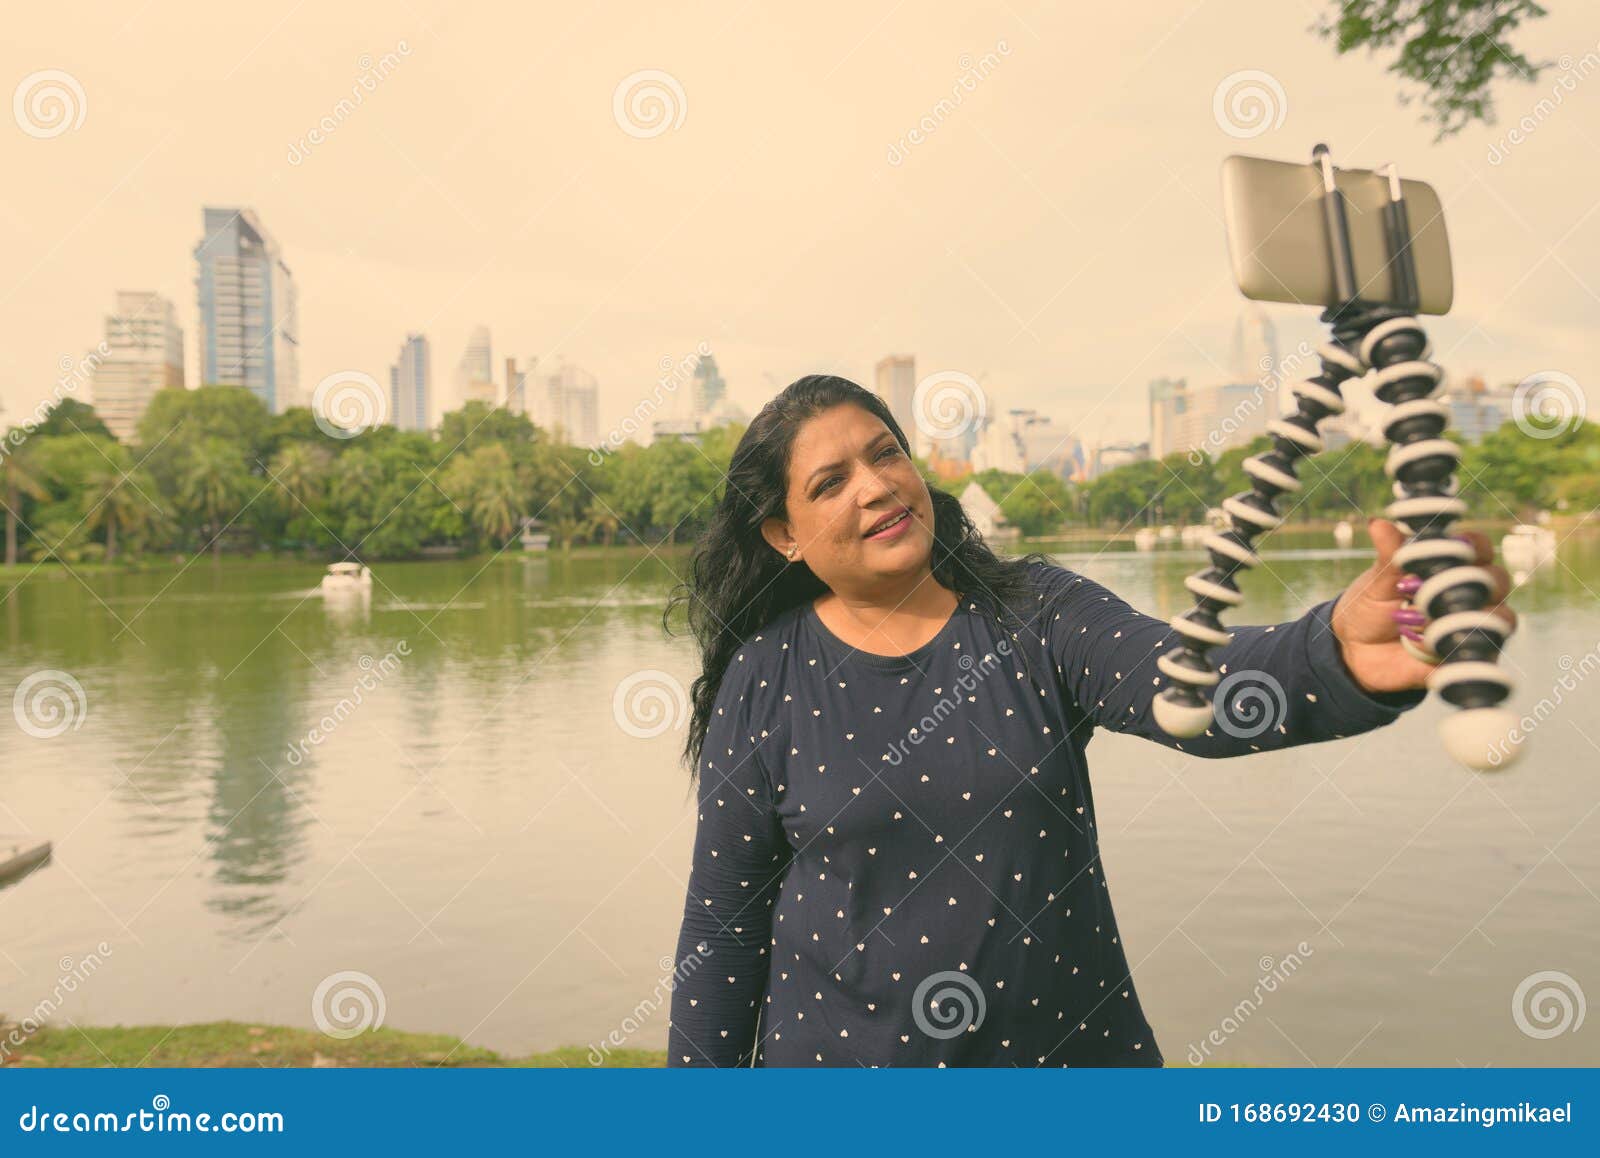 Portrait Of Mature Indian Woman Relaxing At The Park Stock Photo